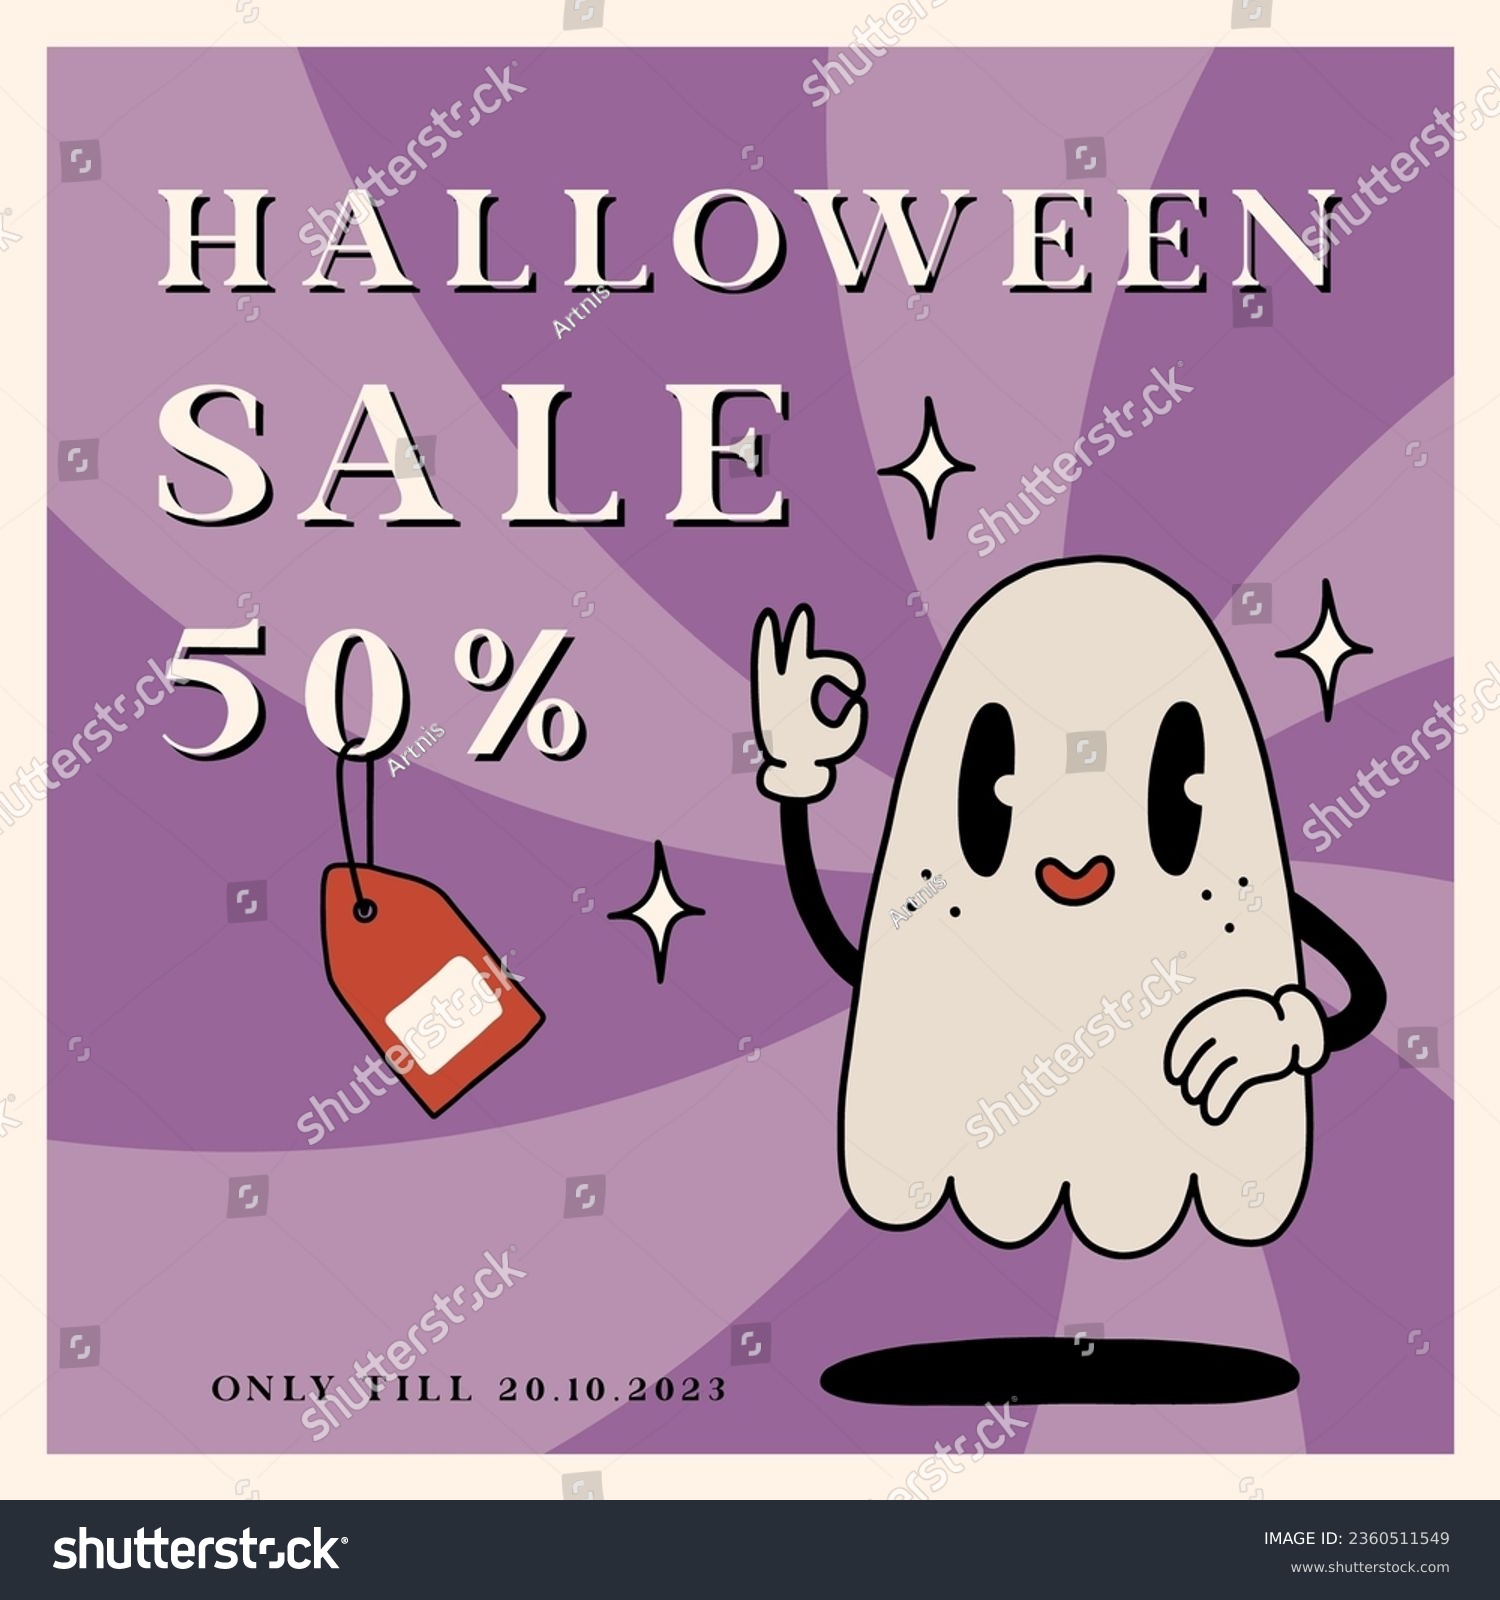 SVG of Retro Happy Halloween Sale banner with spooky cartoon Ghost Character in groovy 70s Vintage Style. Autumn holiday Sale offer ad with cute ghost mascot. Doodle 1970s cartoon style vector illustration svg